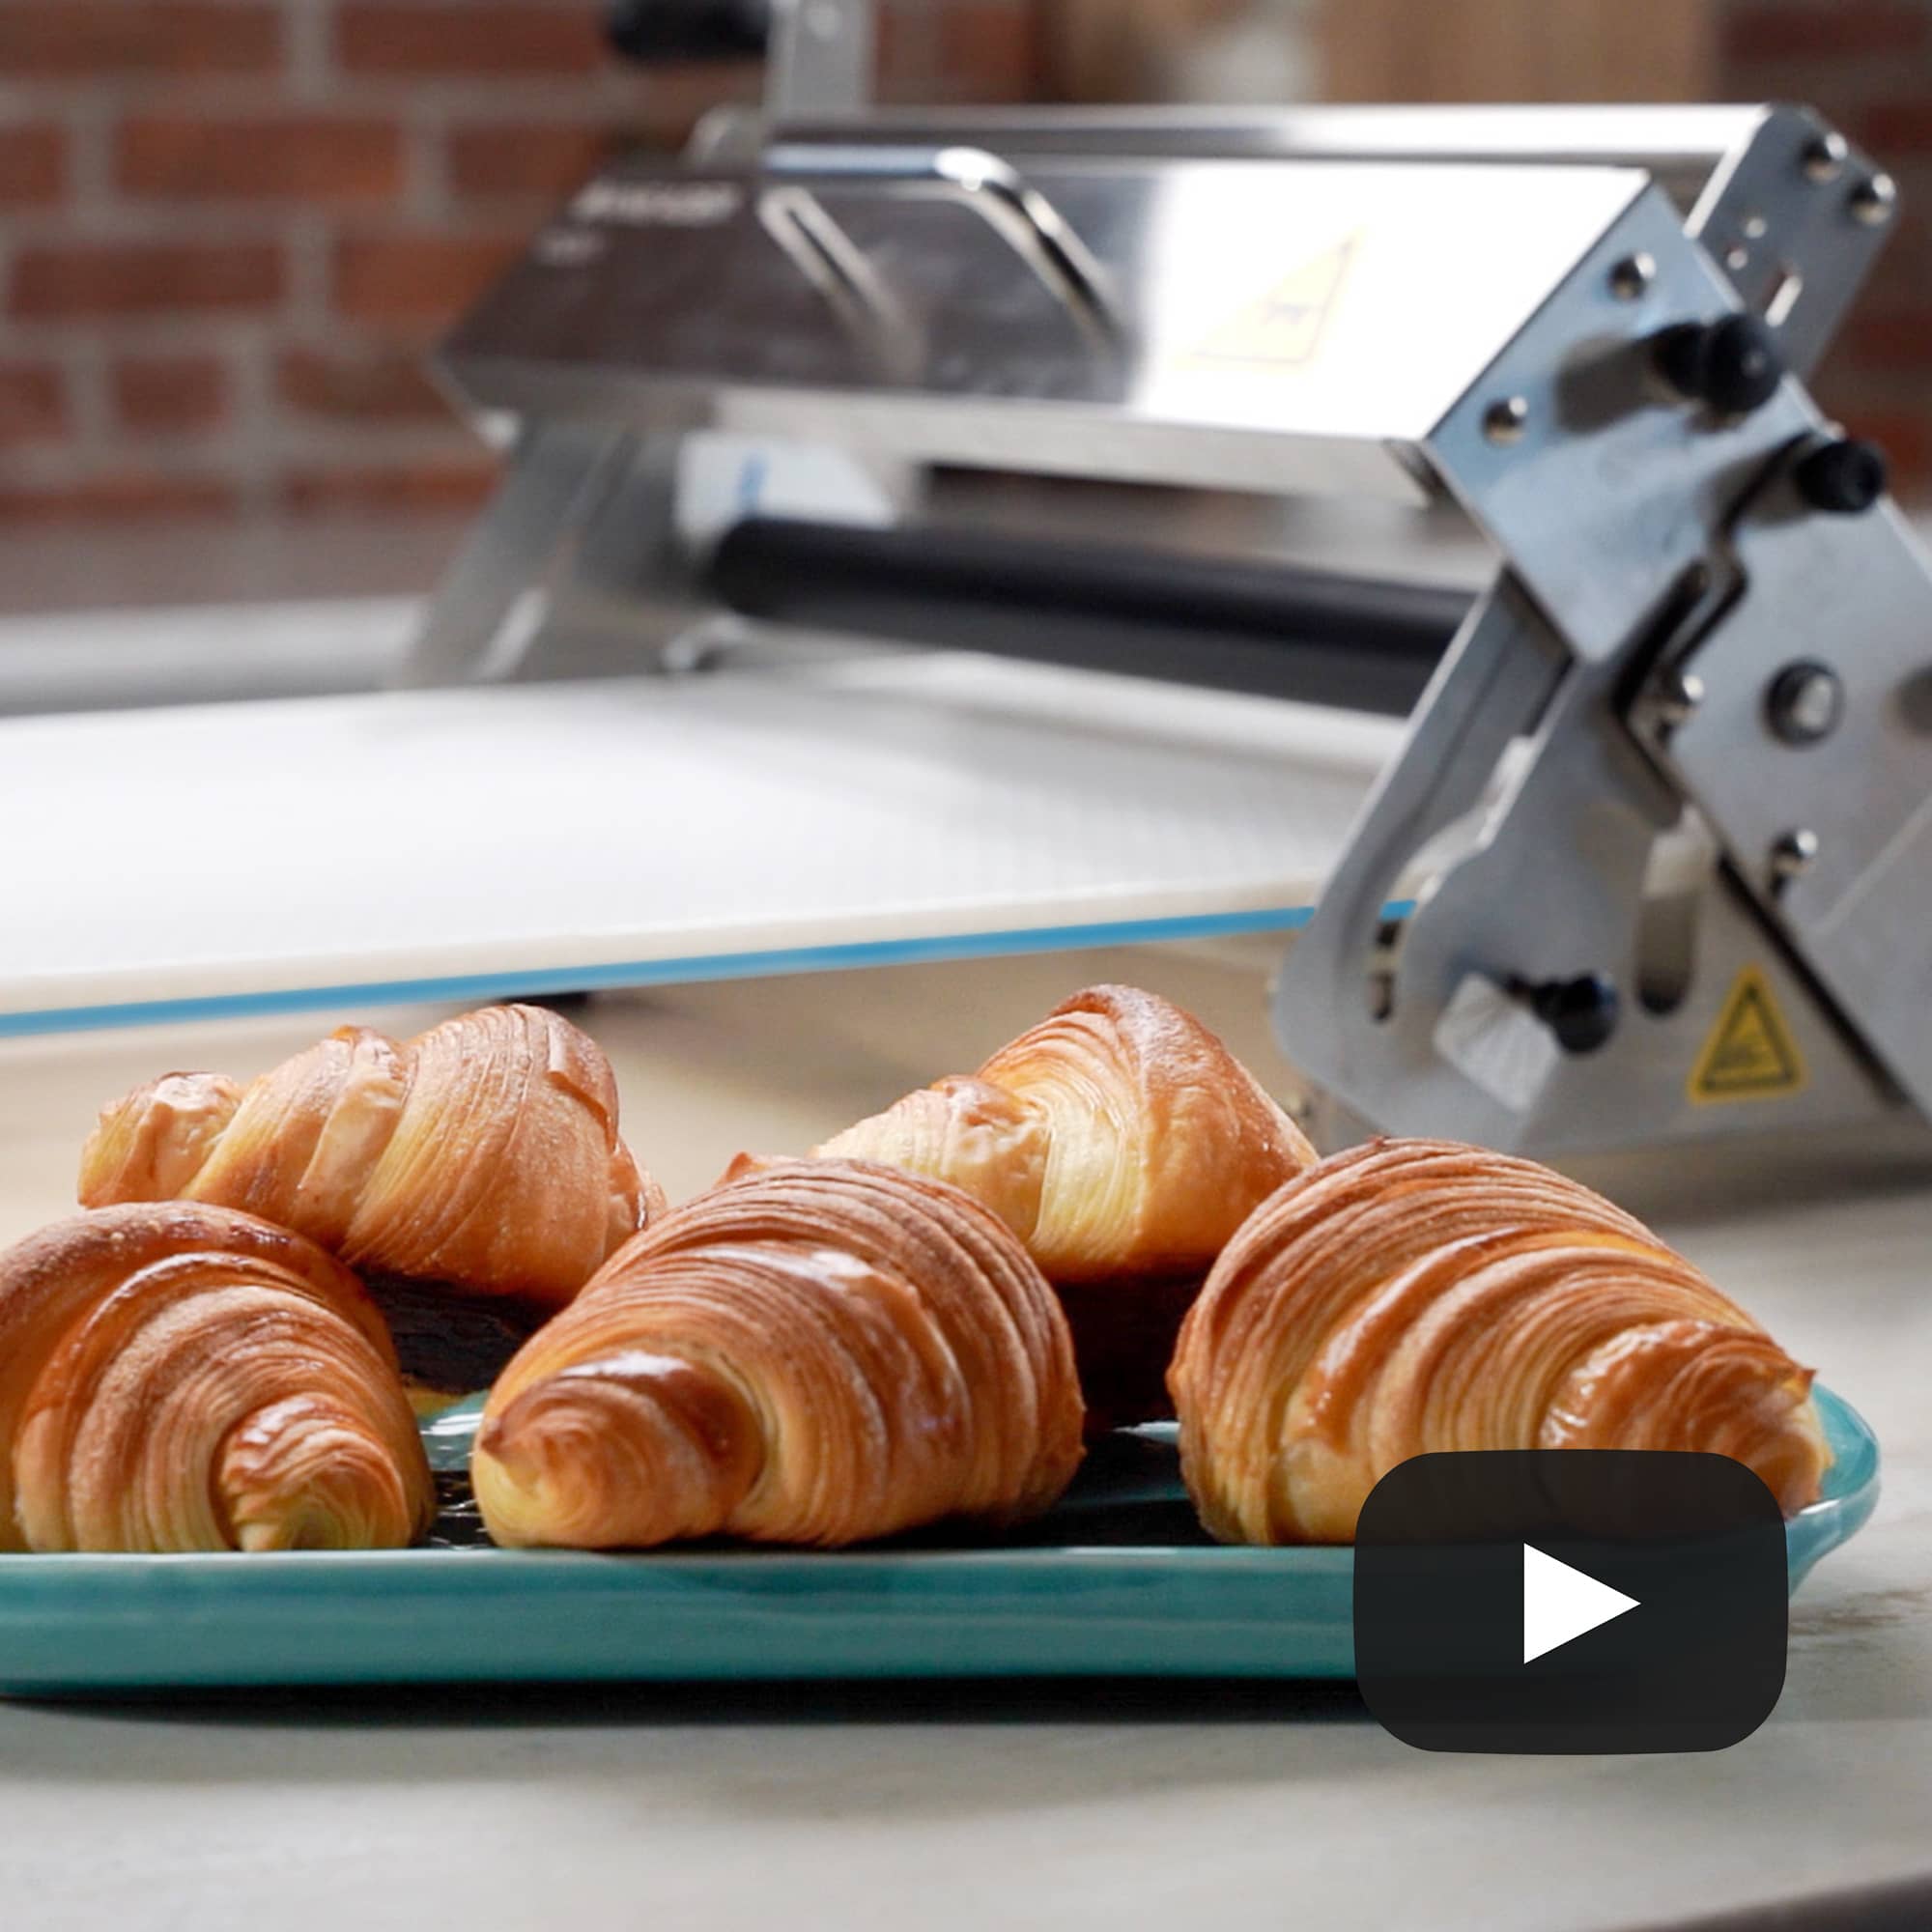 Folding Dough Sheeter with croissants